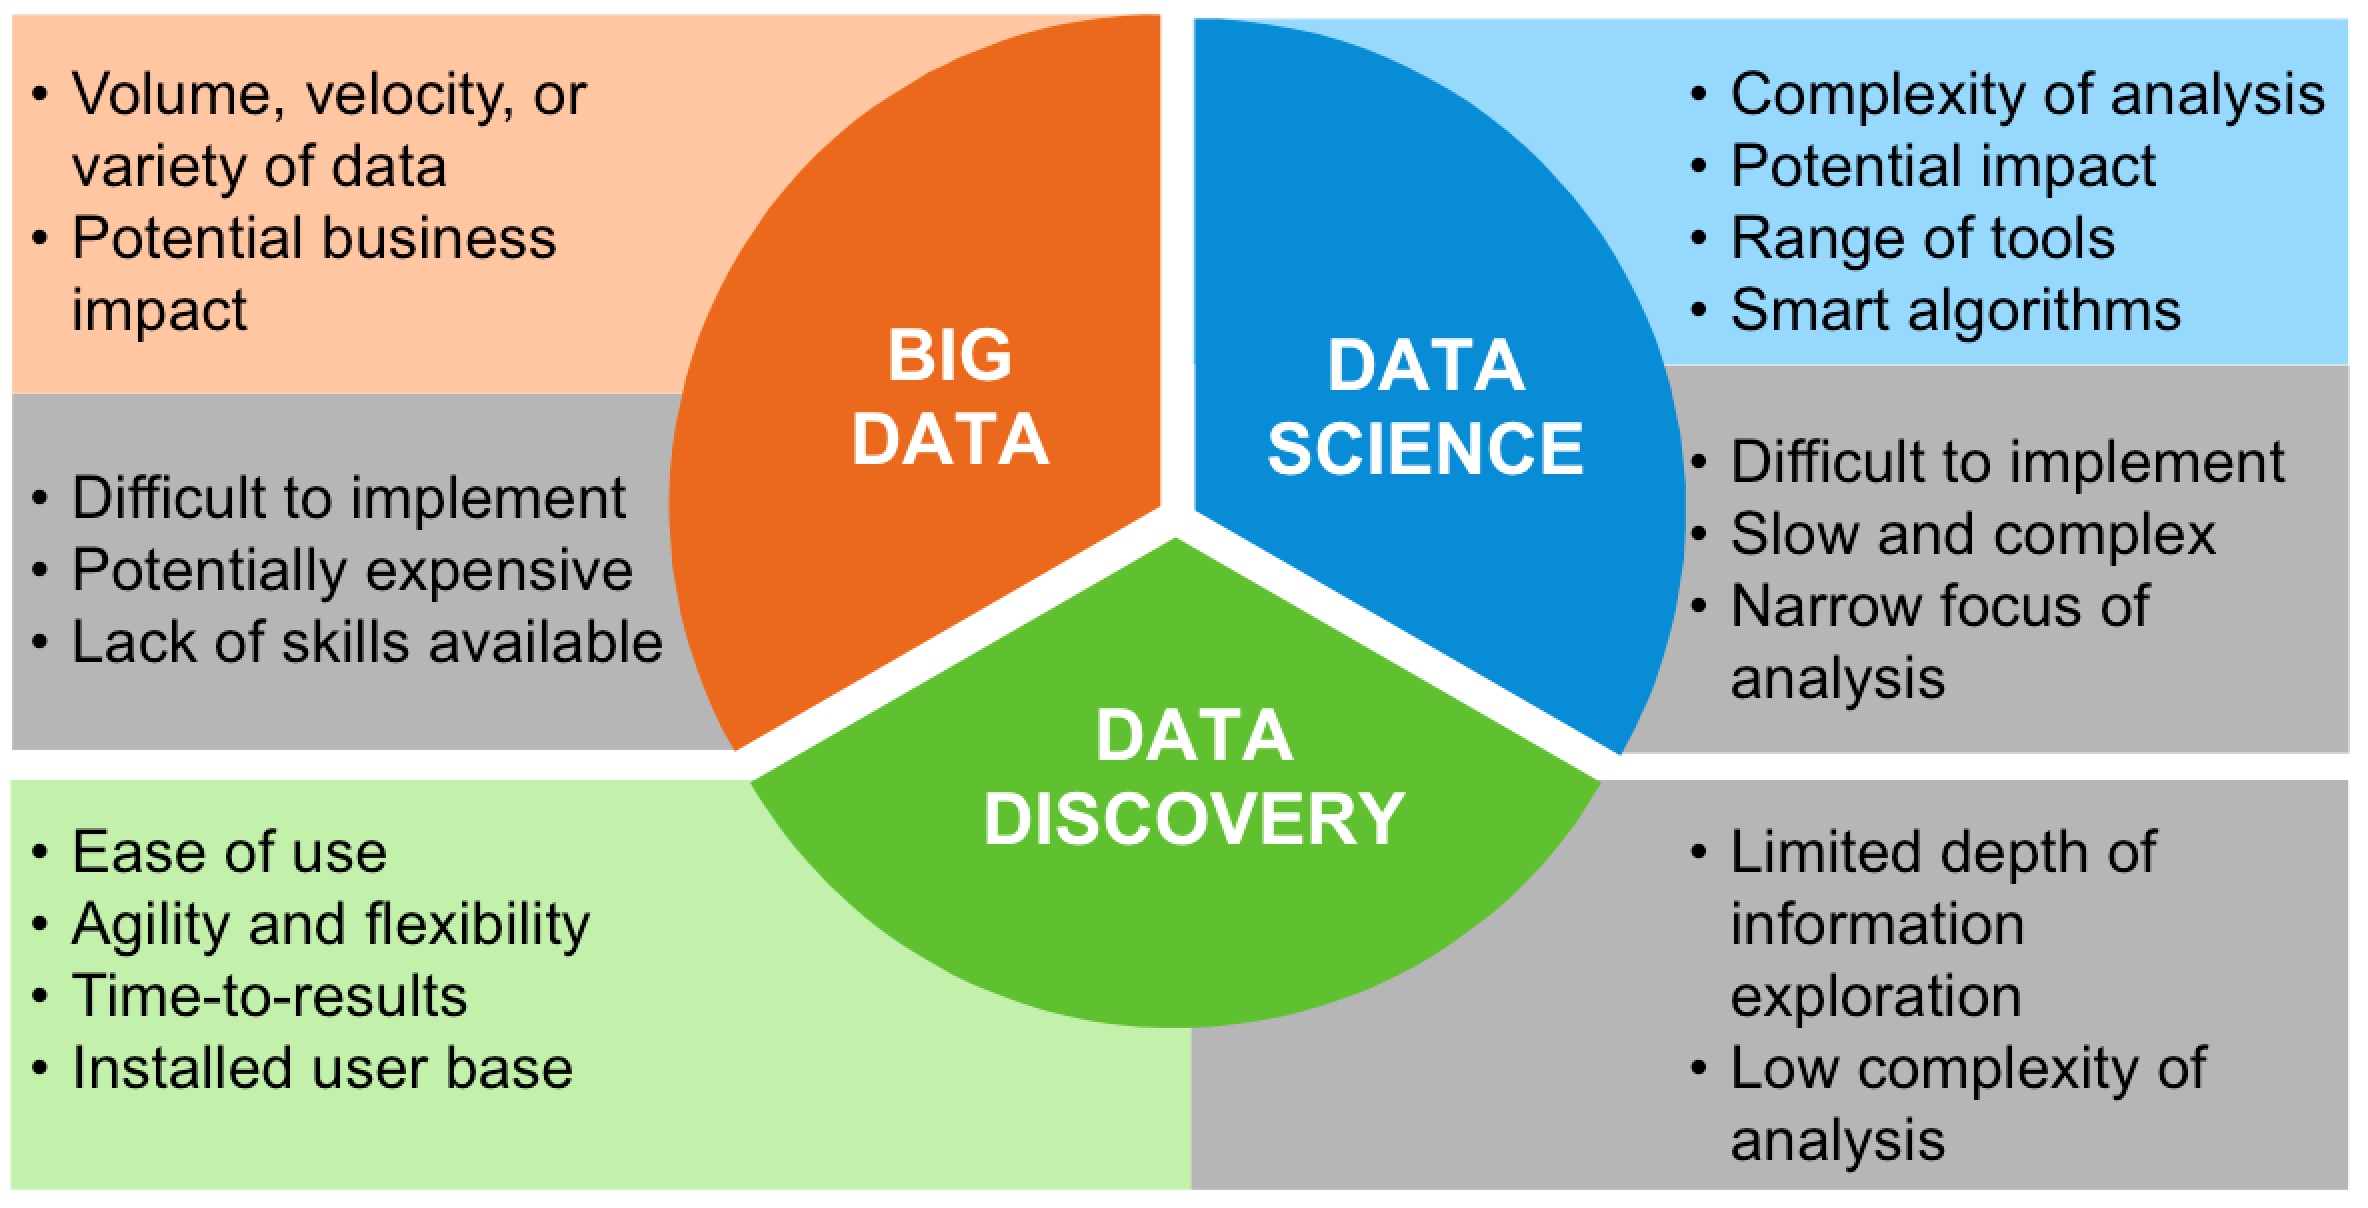 Big Data Discovery Is The Next Big Trend In Analytics | ZDNet